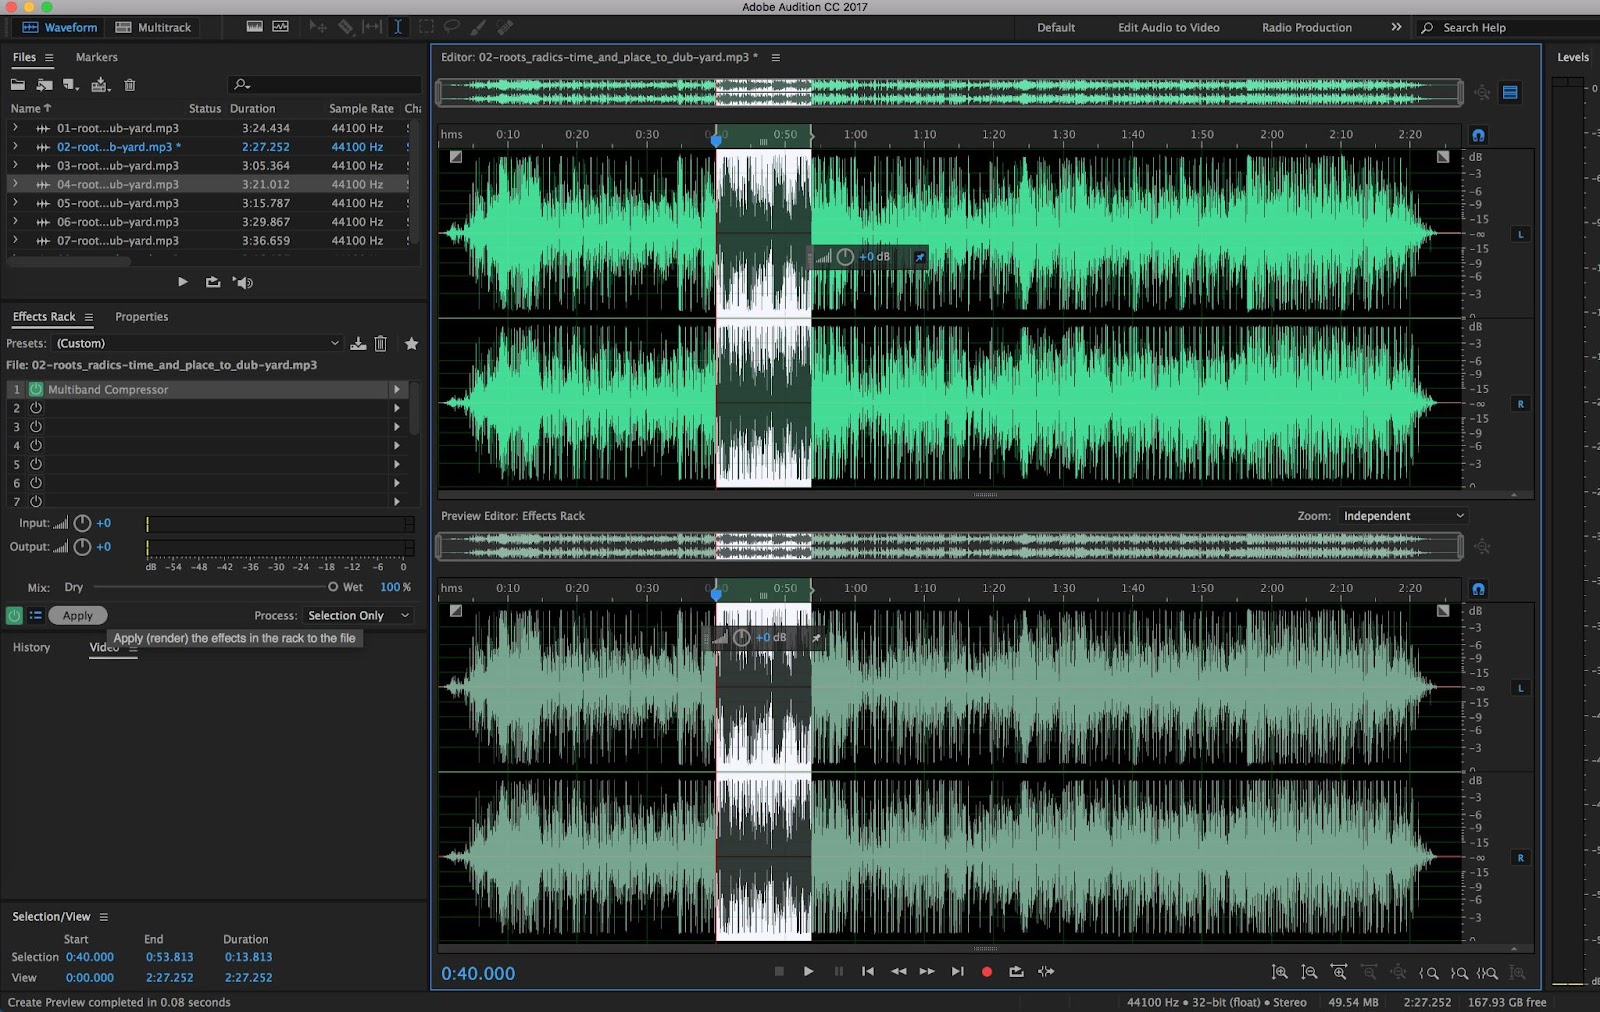 Adobe Audition Mixer view